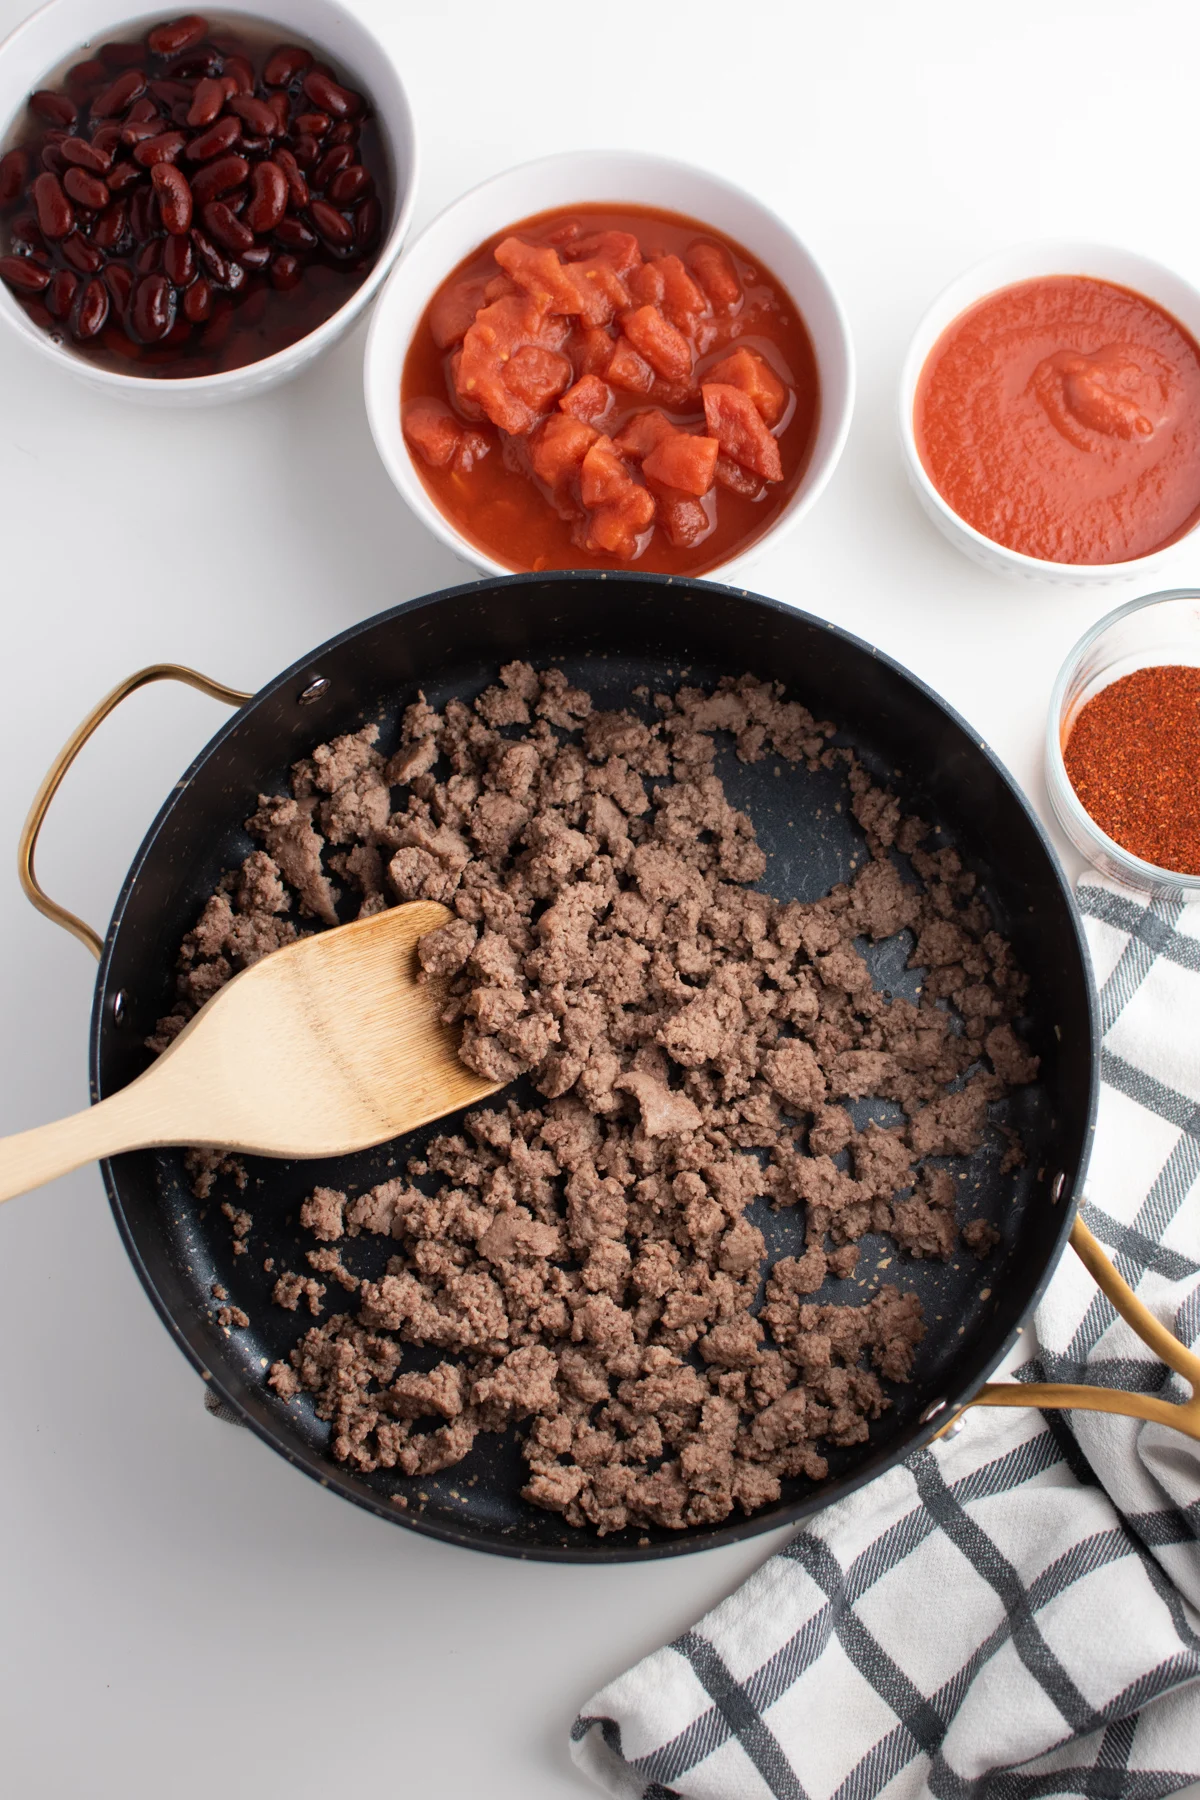 Black skillet filled with cooked ground beef next to kitchen prep bowls.